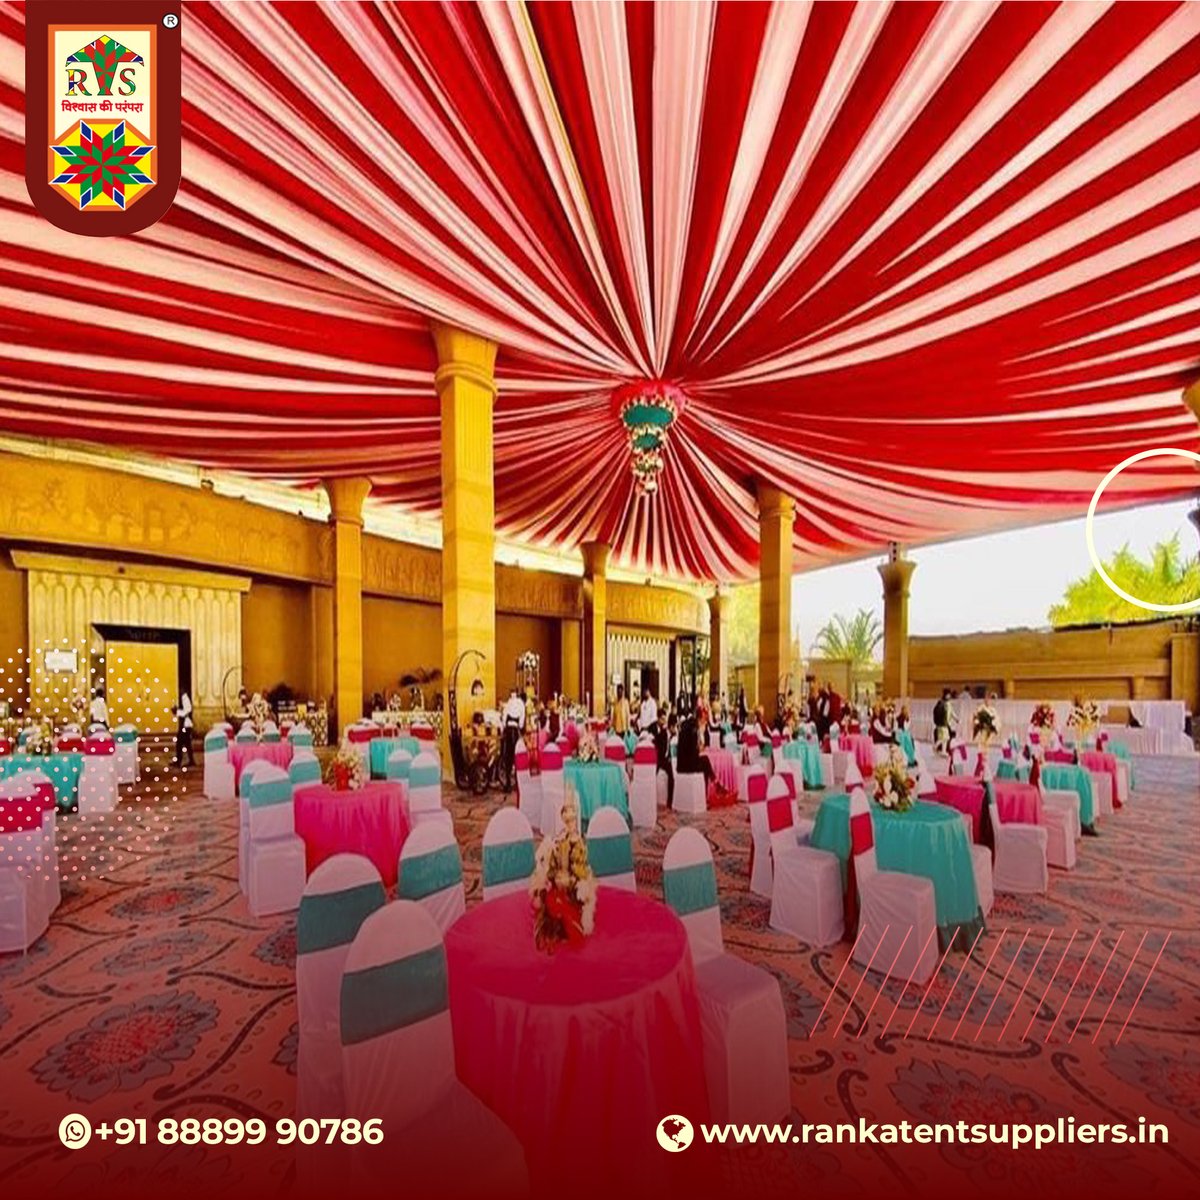 Where love meets elegance: Our red and white wedding mandap.
#weddingdecorations #mandapam #rankatentsuppliers